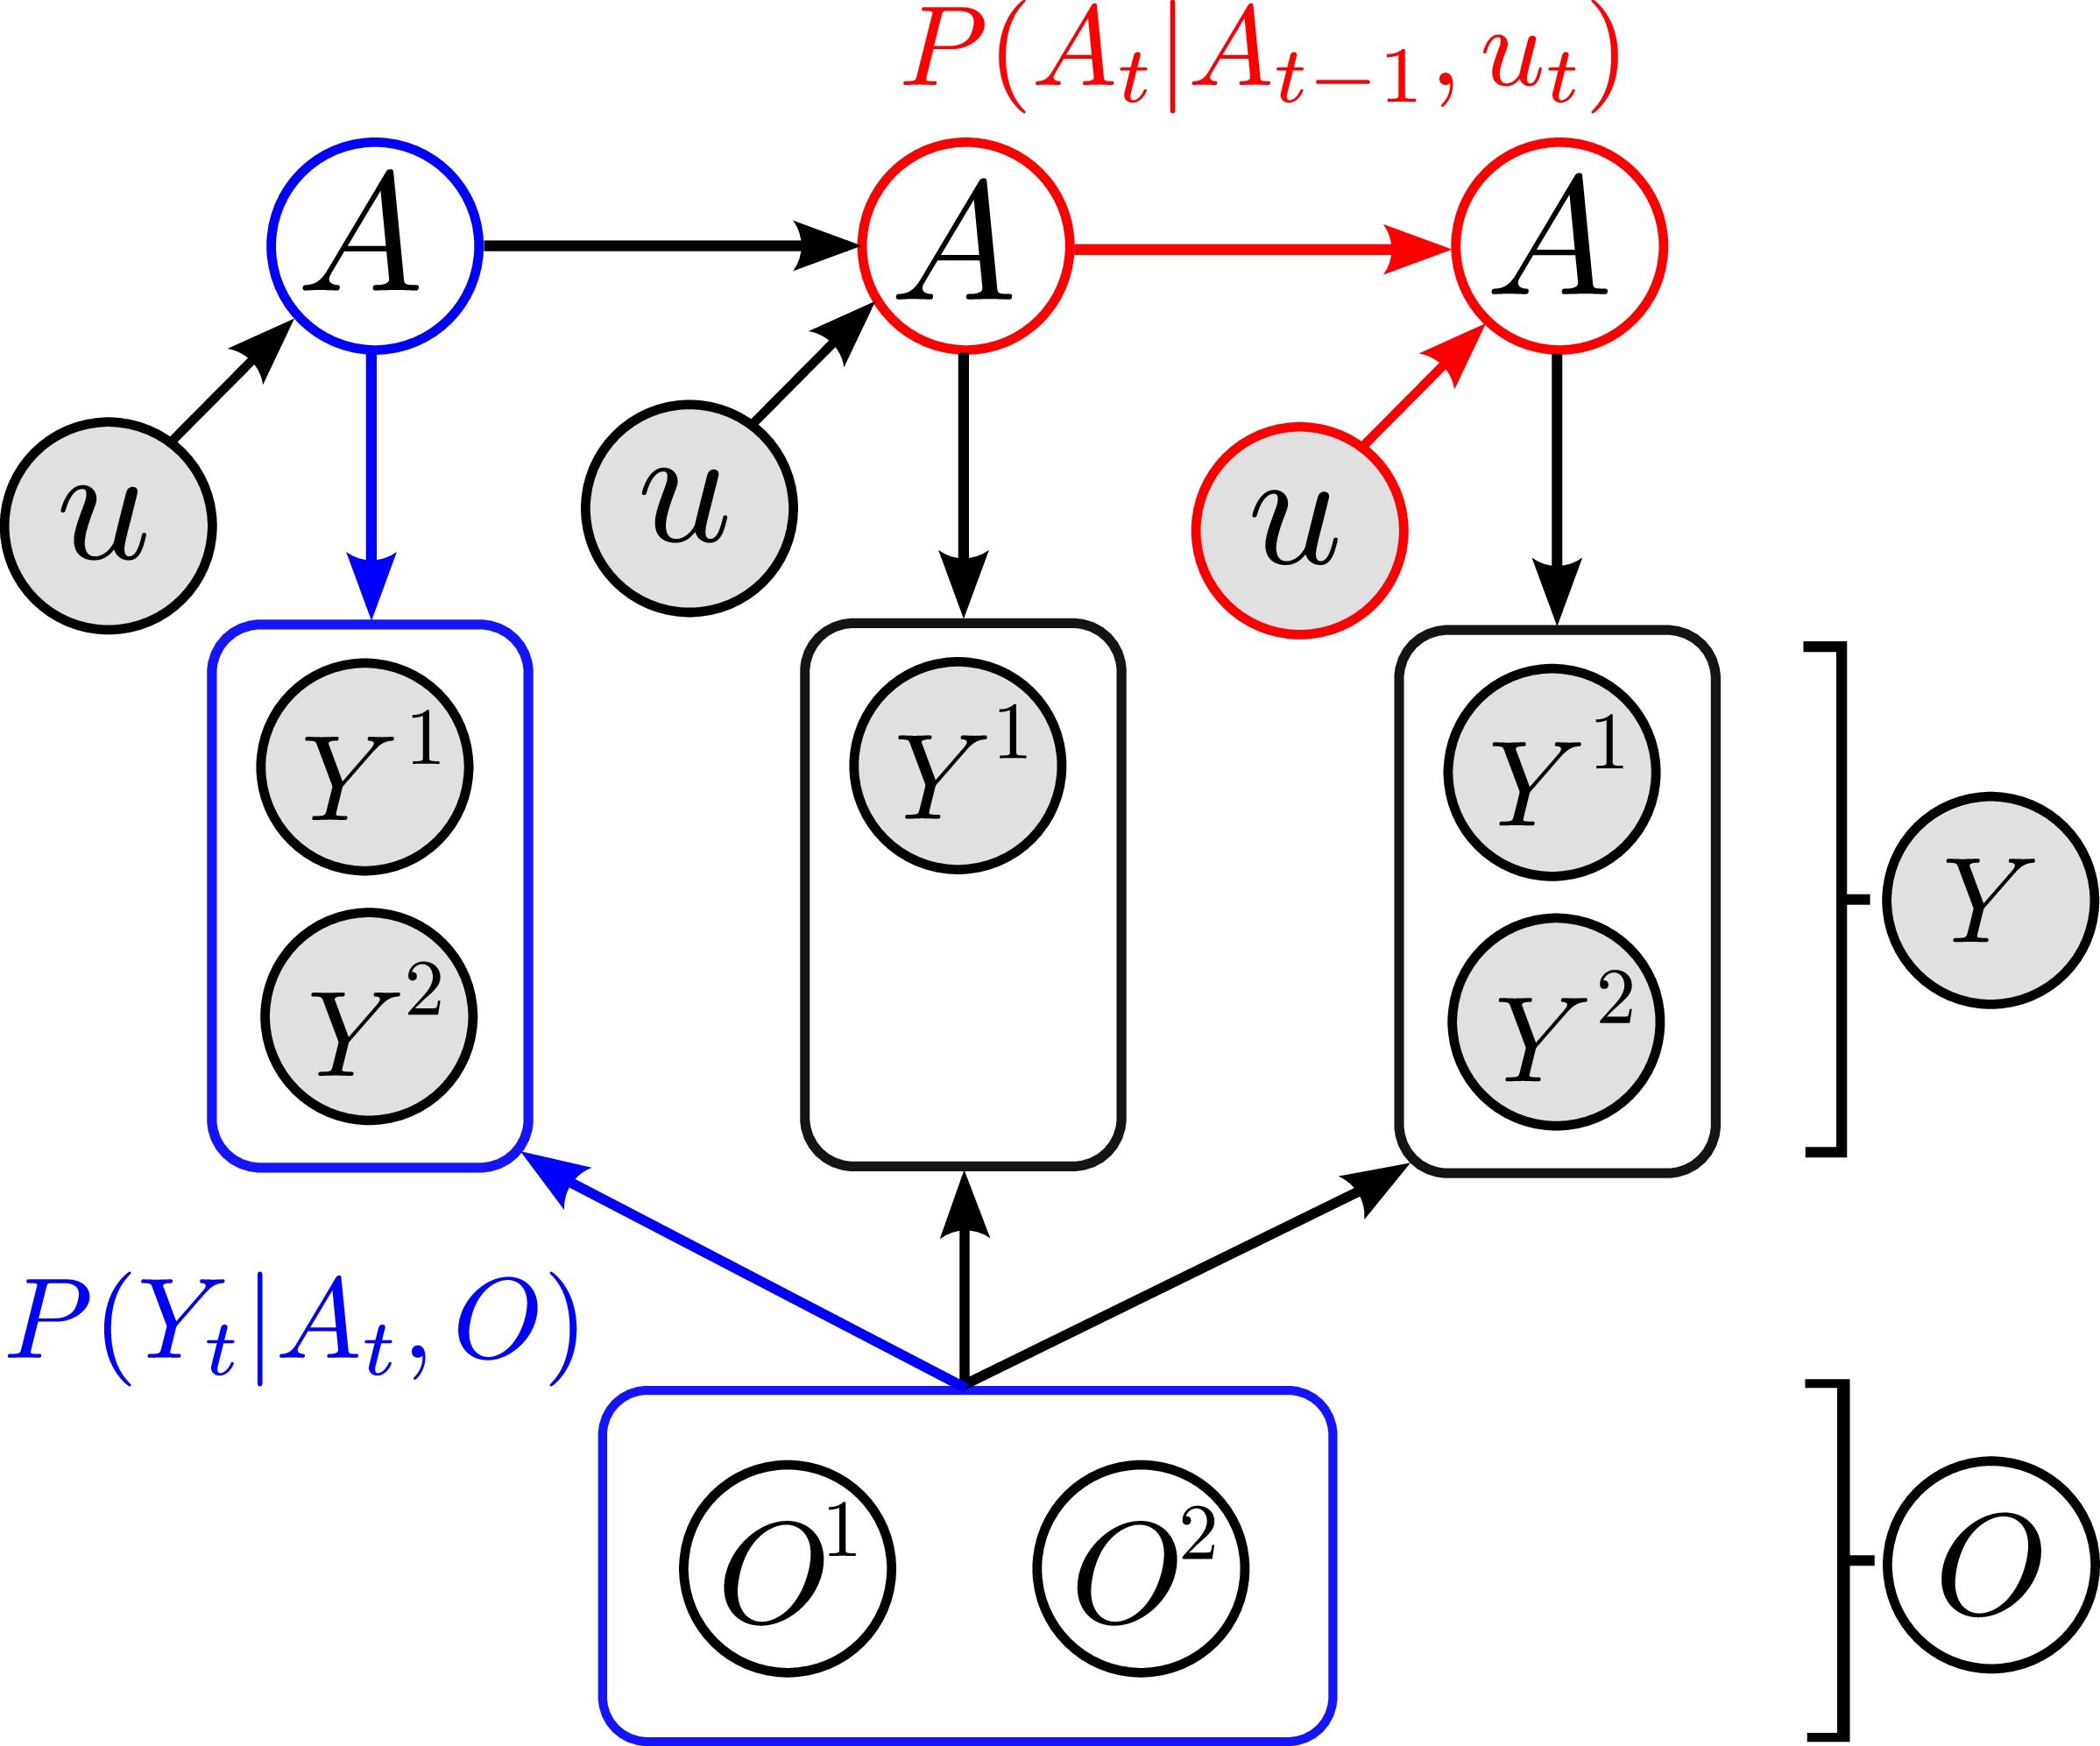 Non-parametric Bayesian state space filter